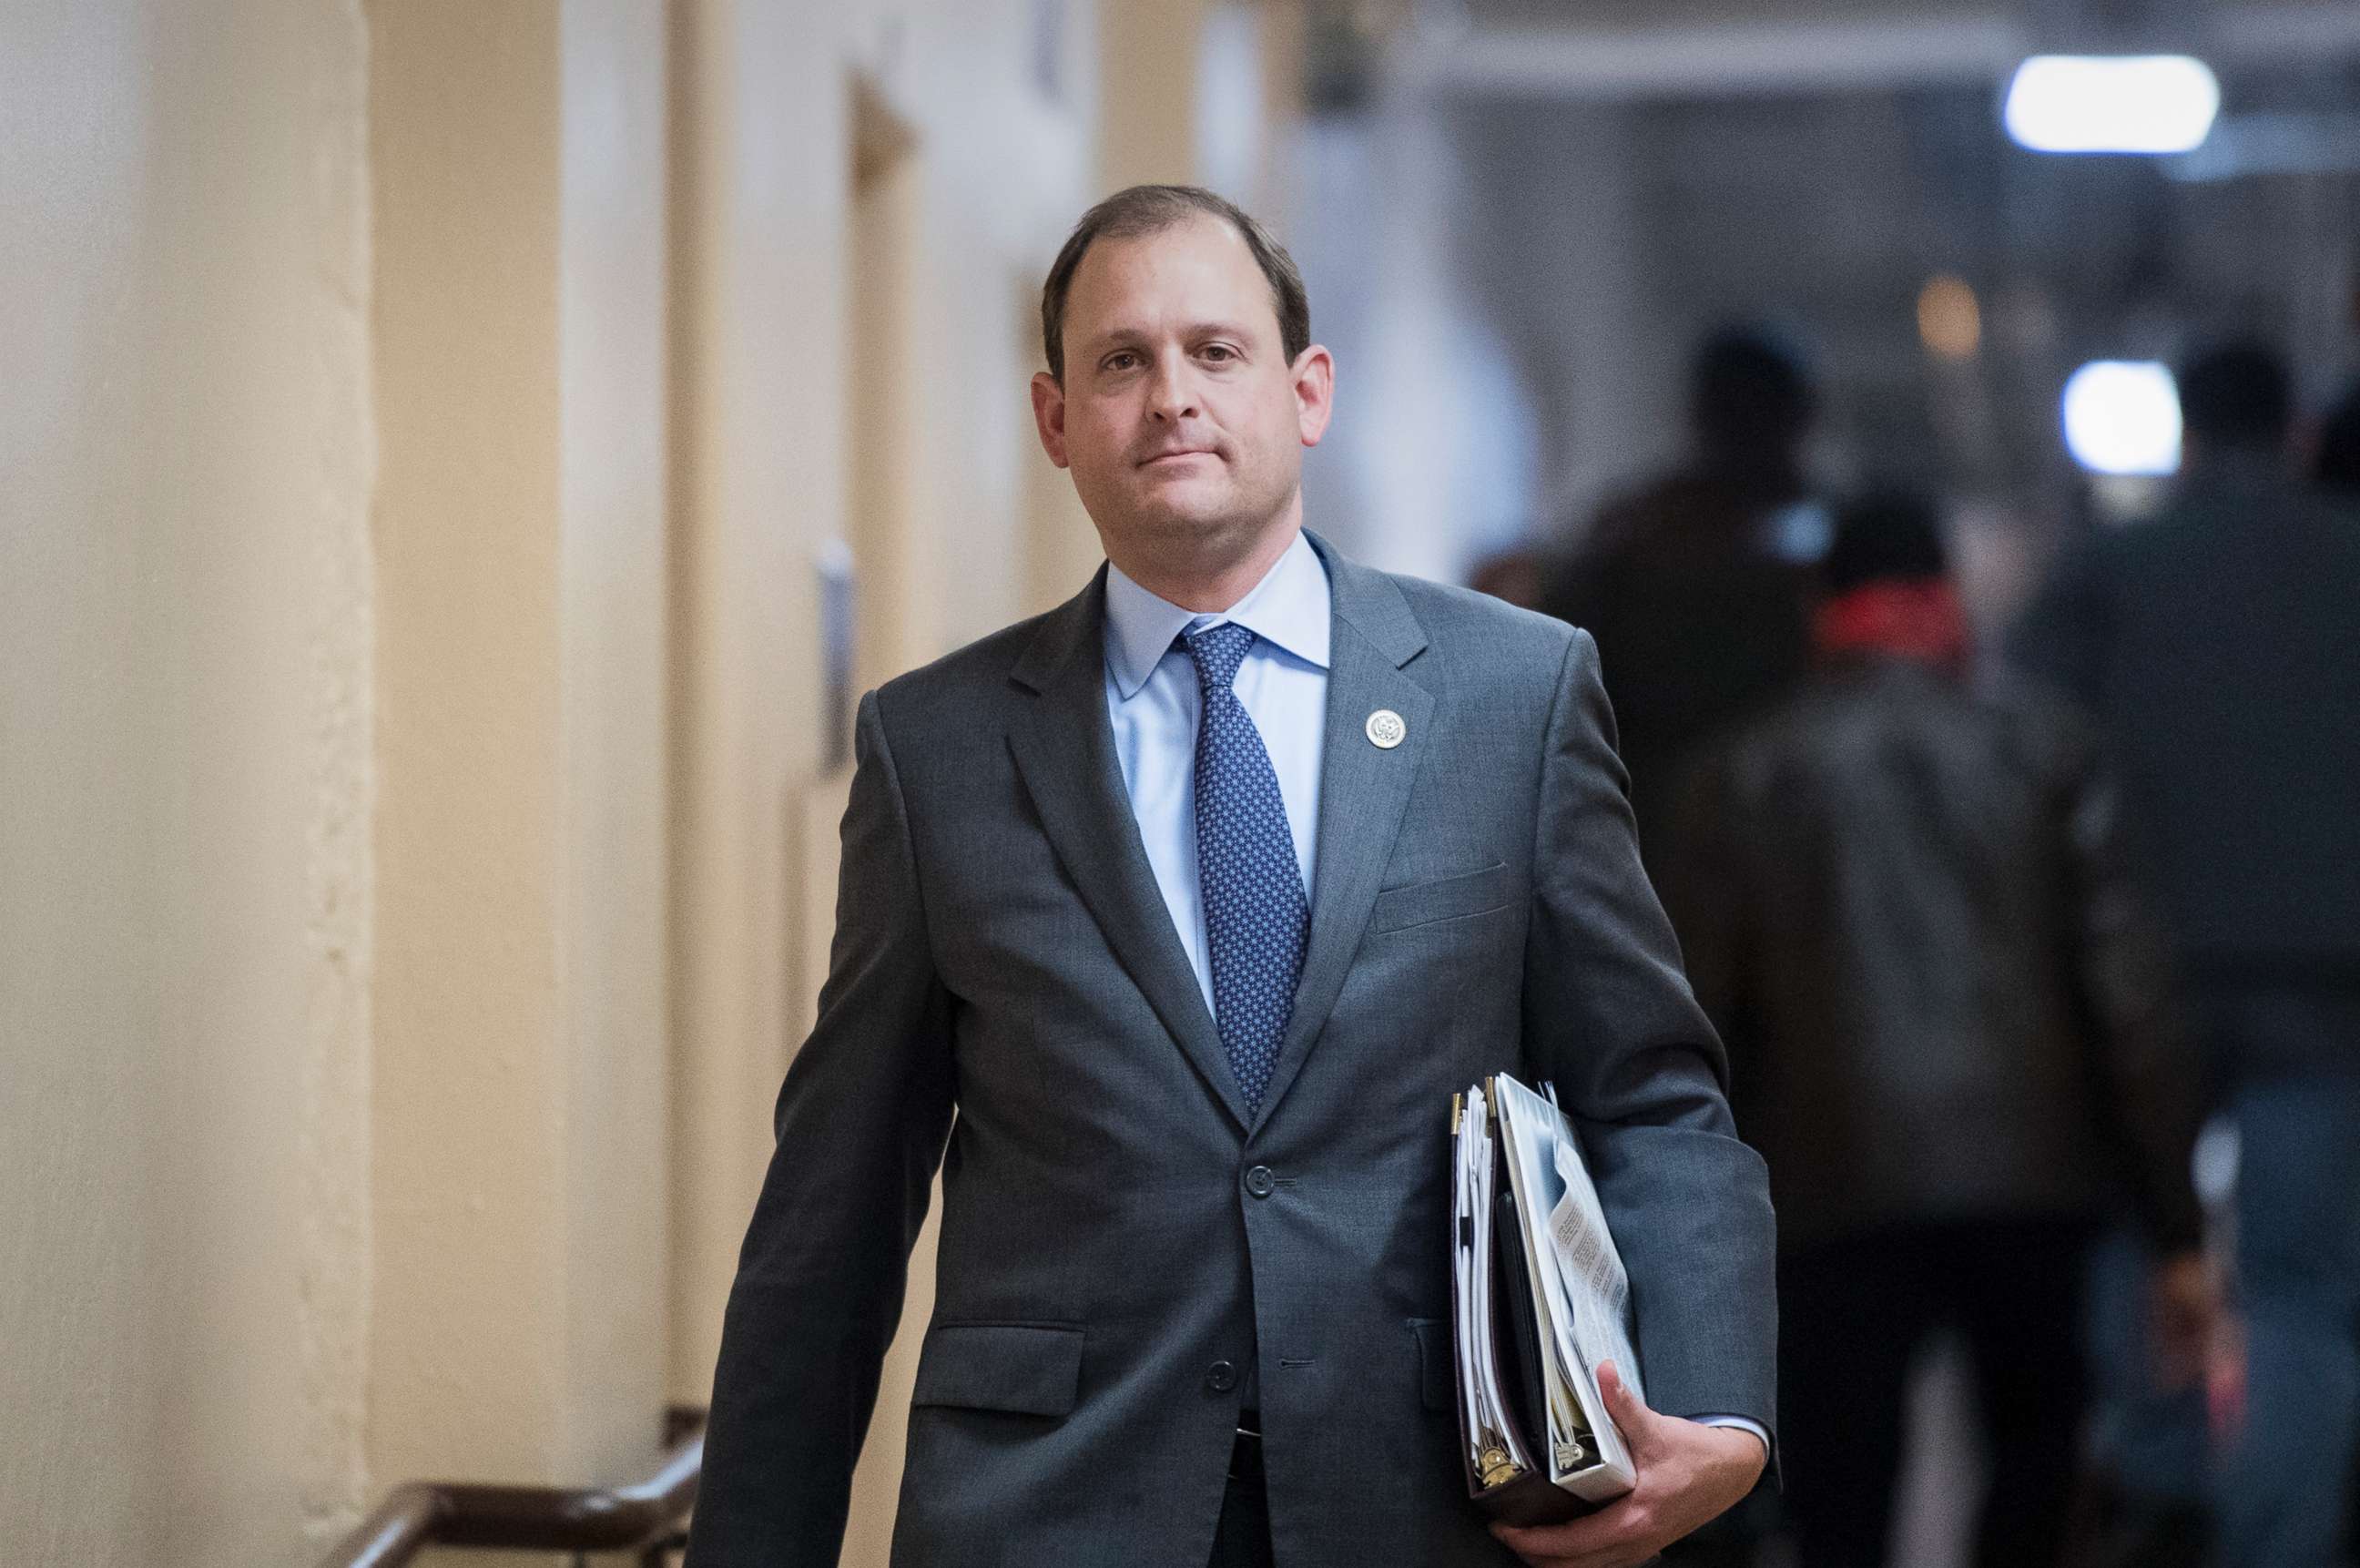 PHOTO: Rep. Andy Barr arrives for the House Republican Conference meeting in the Capitol, Jan. 9, 2018, in Washington, D.C.